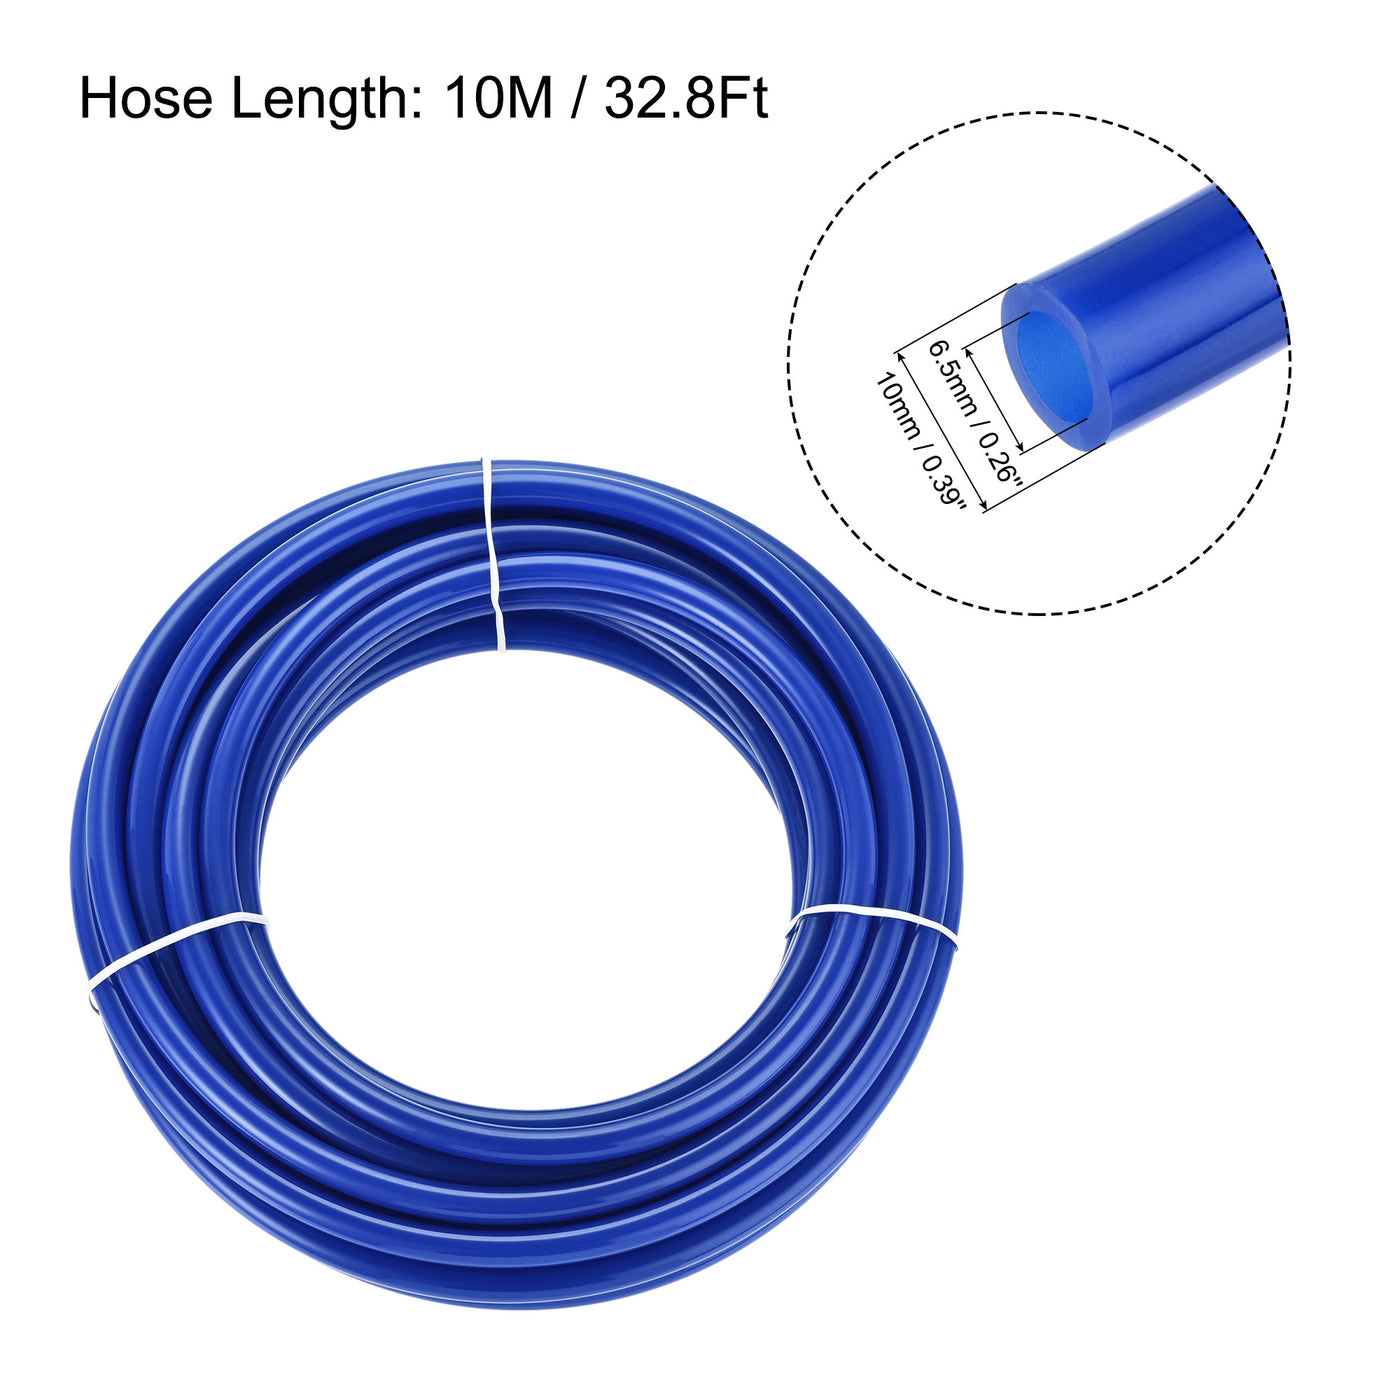 Uxcell Uxcell Pneumatic 10mm OD Polyurethane PU Air Hose Tubing Kit 10 Meters Blue with 14 Pcs Push to Connect Fittings